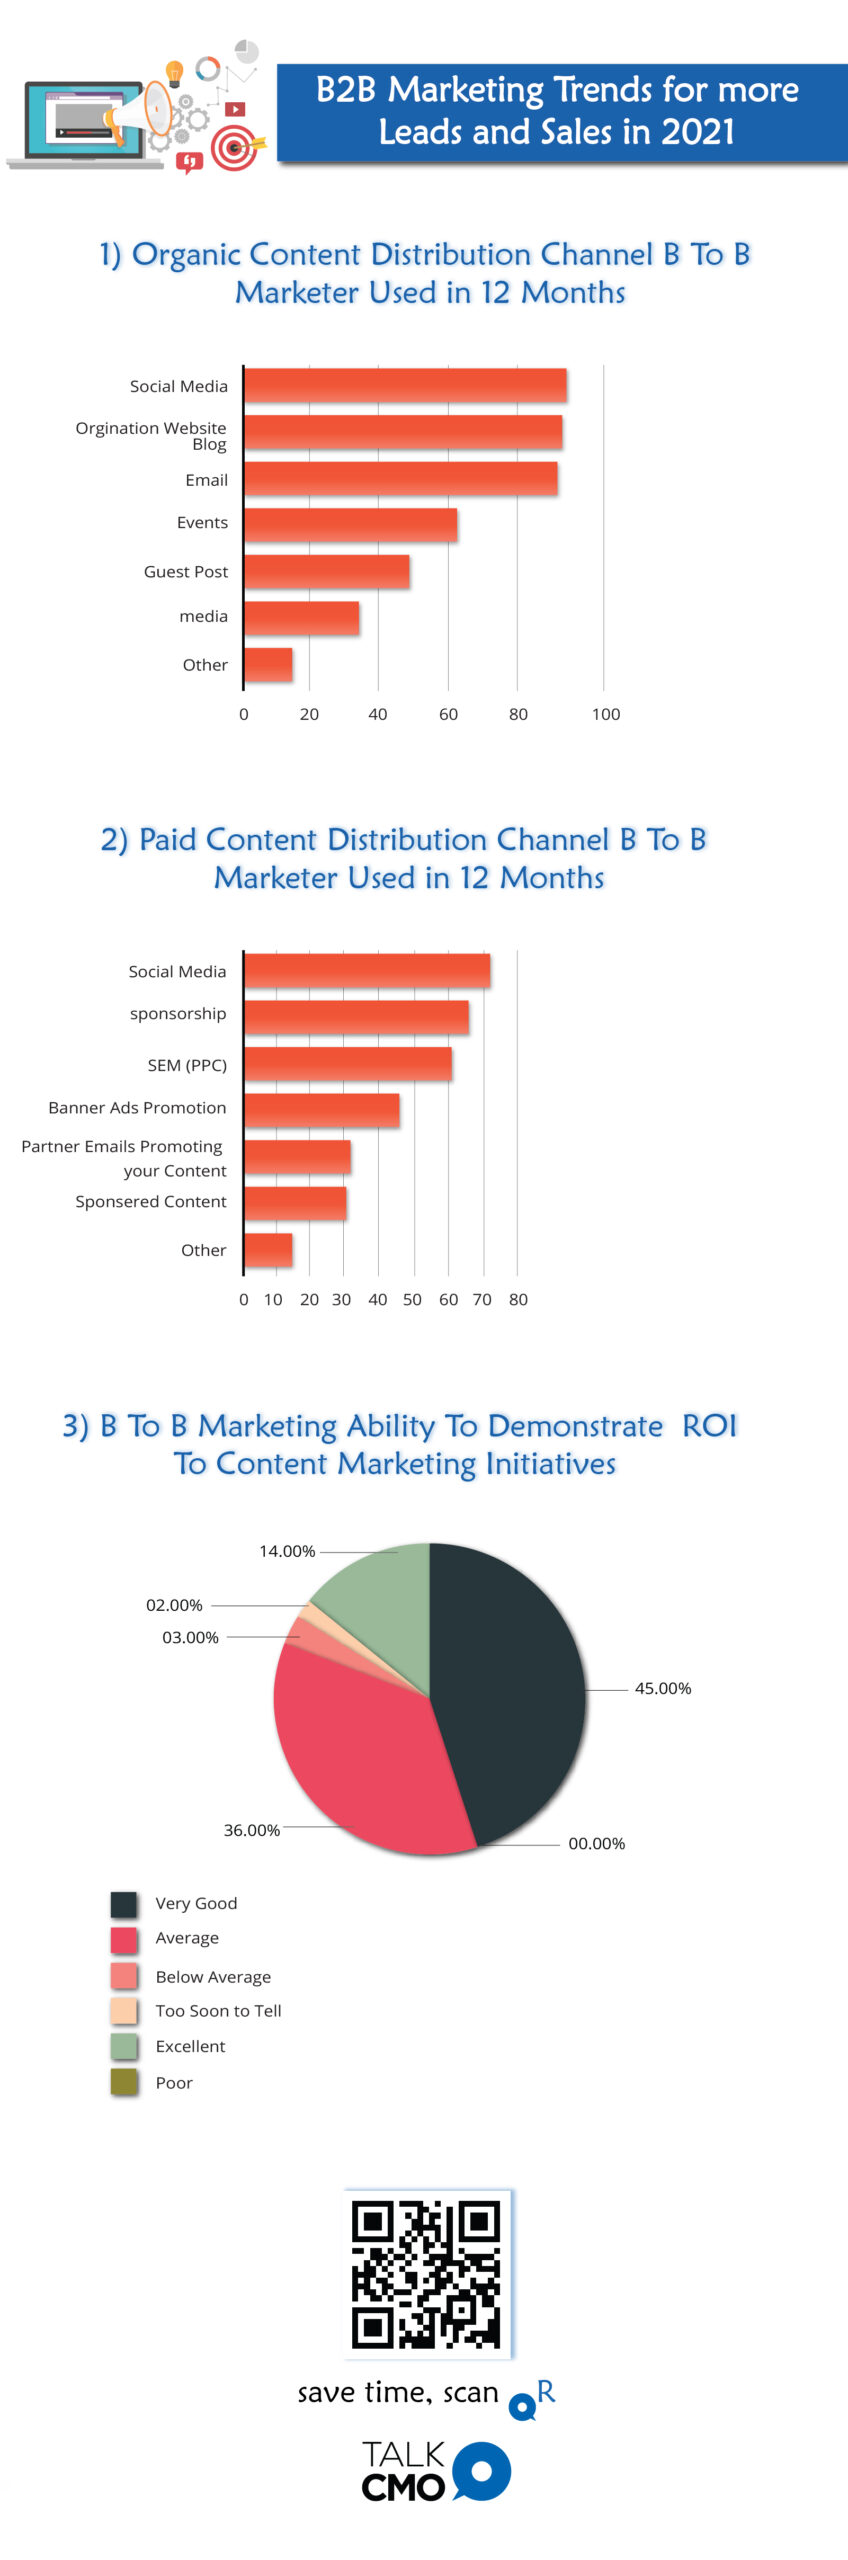 B2B Marketing Trends for more Leads and Sales in 2021-02 (1)